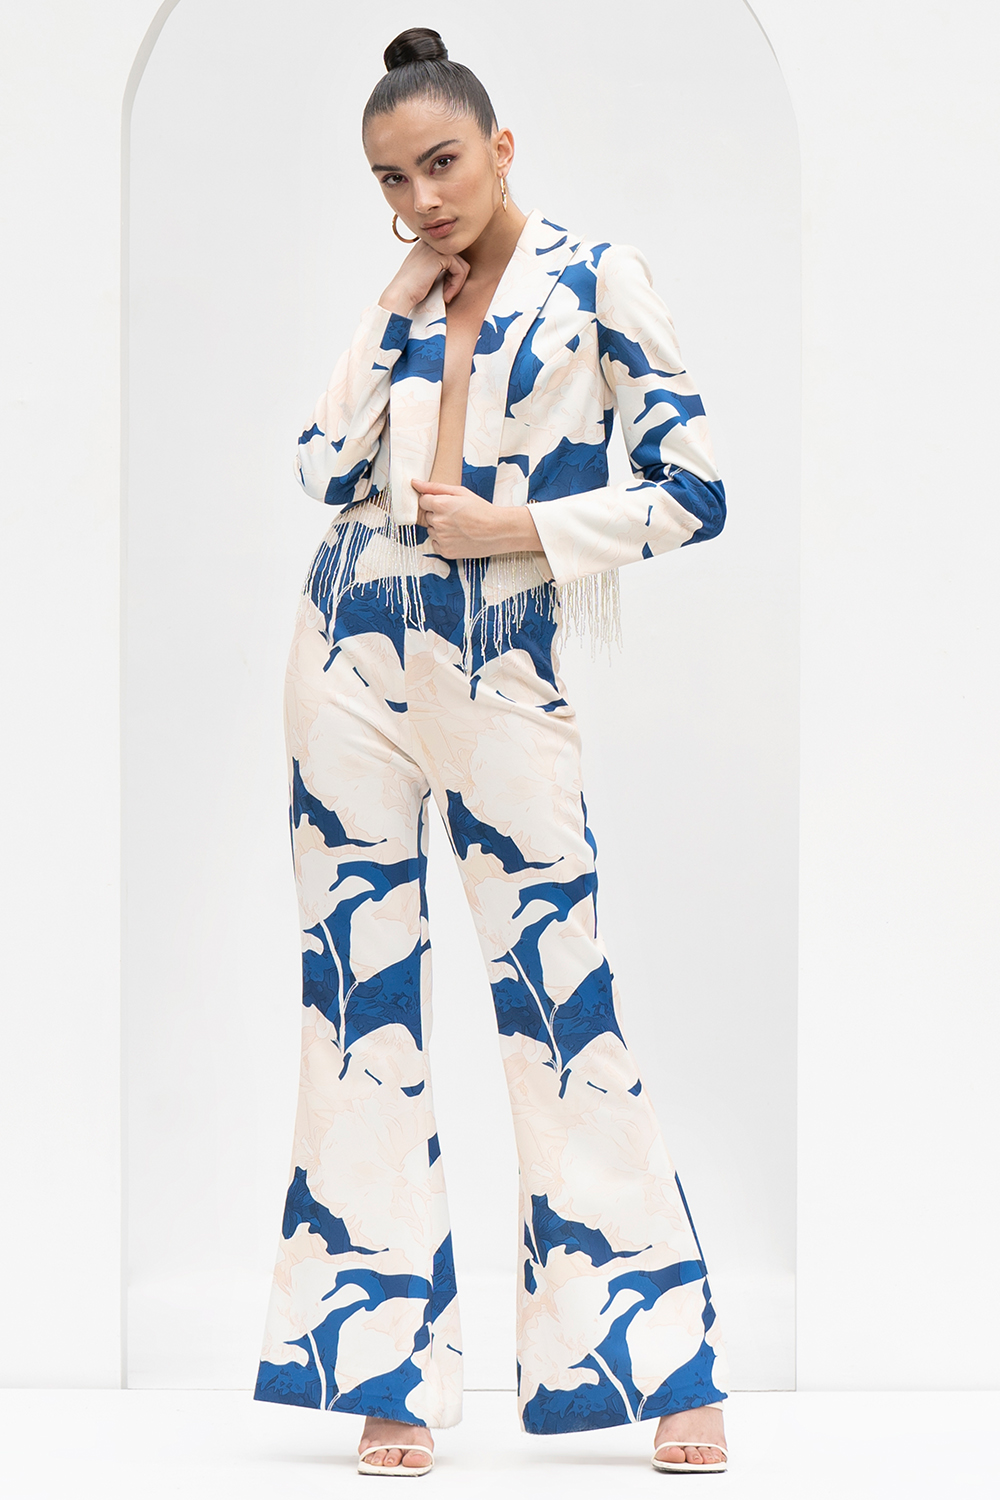 Mystic Blue Texture Printed Foma Jacket Set With Dazzling Hand Embroidery Tassels At Hem 